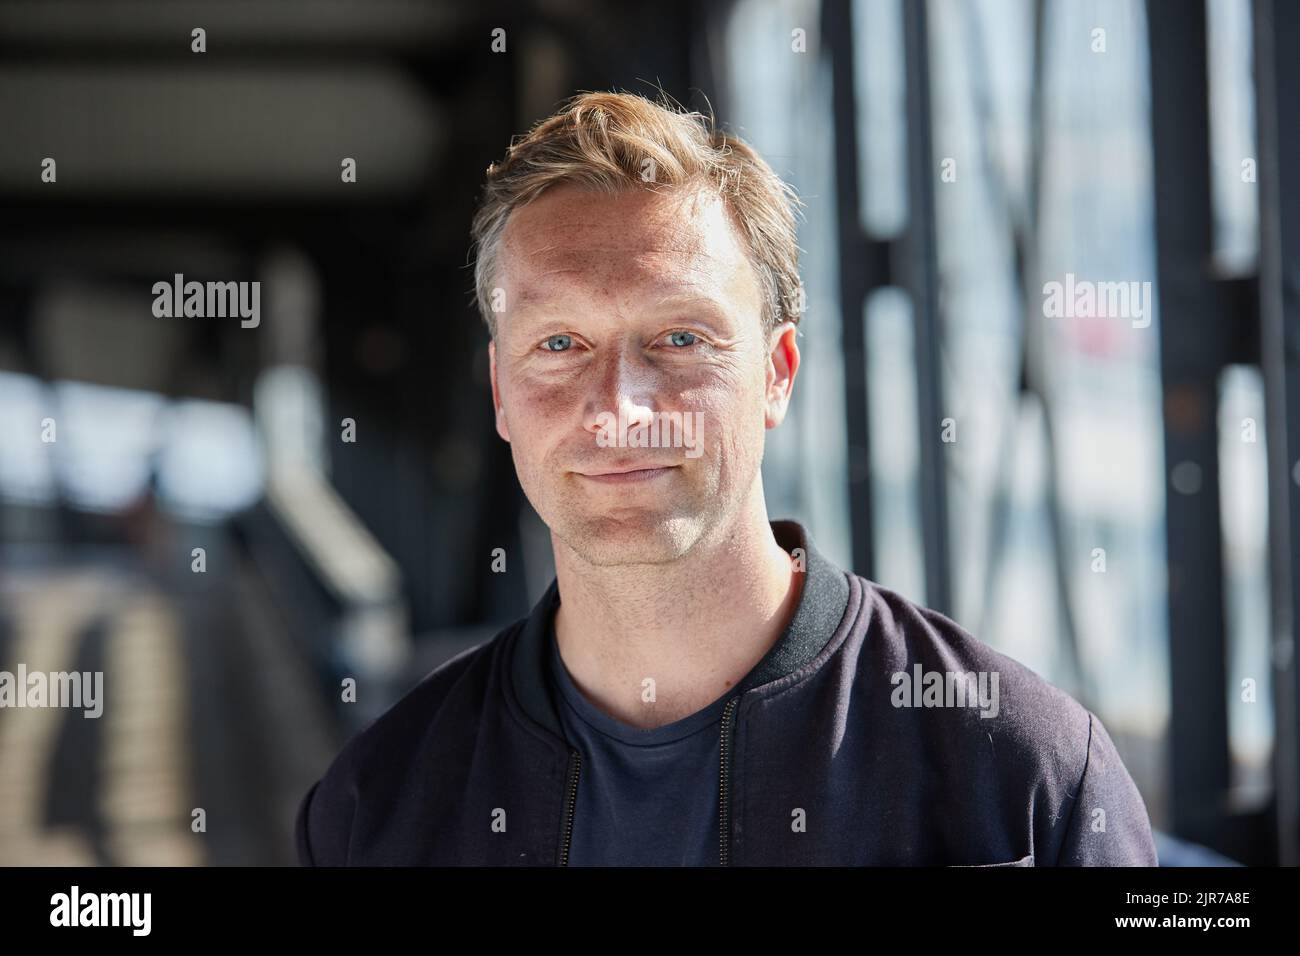 Hamburg, Germany. 22nd Aug, 2022. Exclusive: Robin Sondermann, actor, at a photo session at Baumwall. Robin Sondermann stars in the crime thriller 'In Wahrheit - Unter Wasser,' which will be broadcast on ZDF on September 3. Credit: Georg Wendt/dpa/Alamy Live News Stock Photo